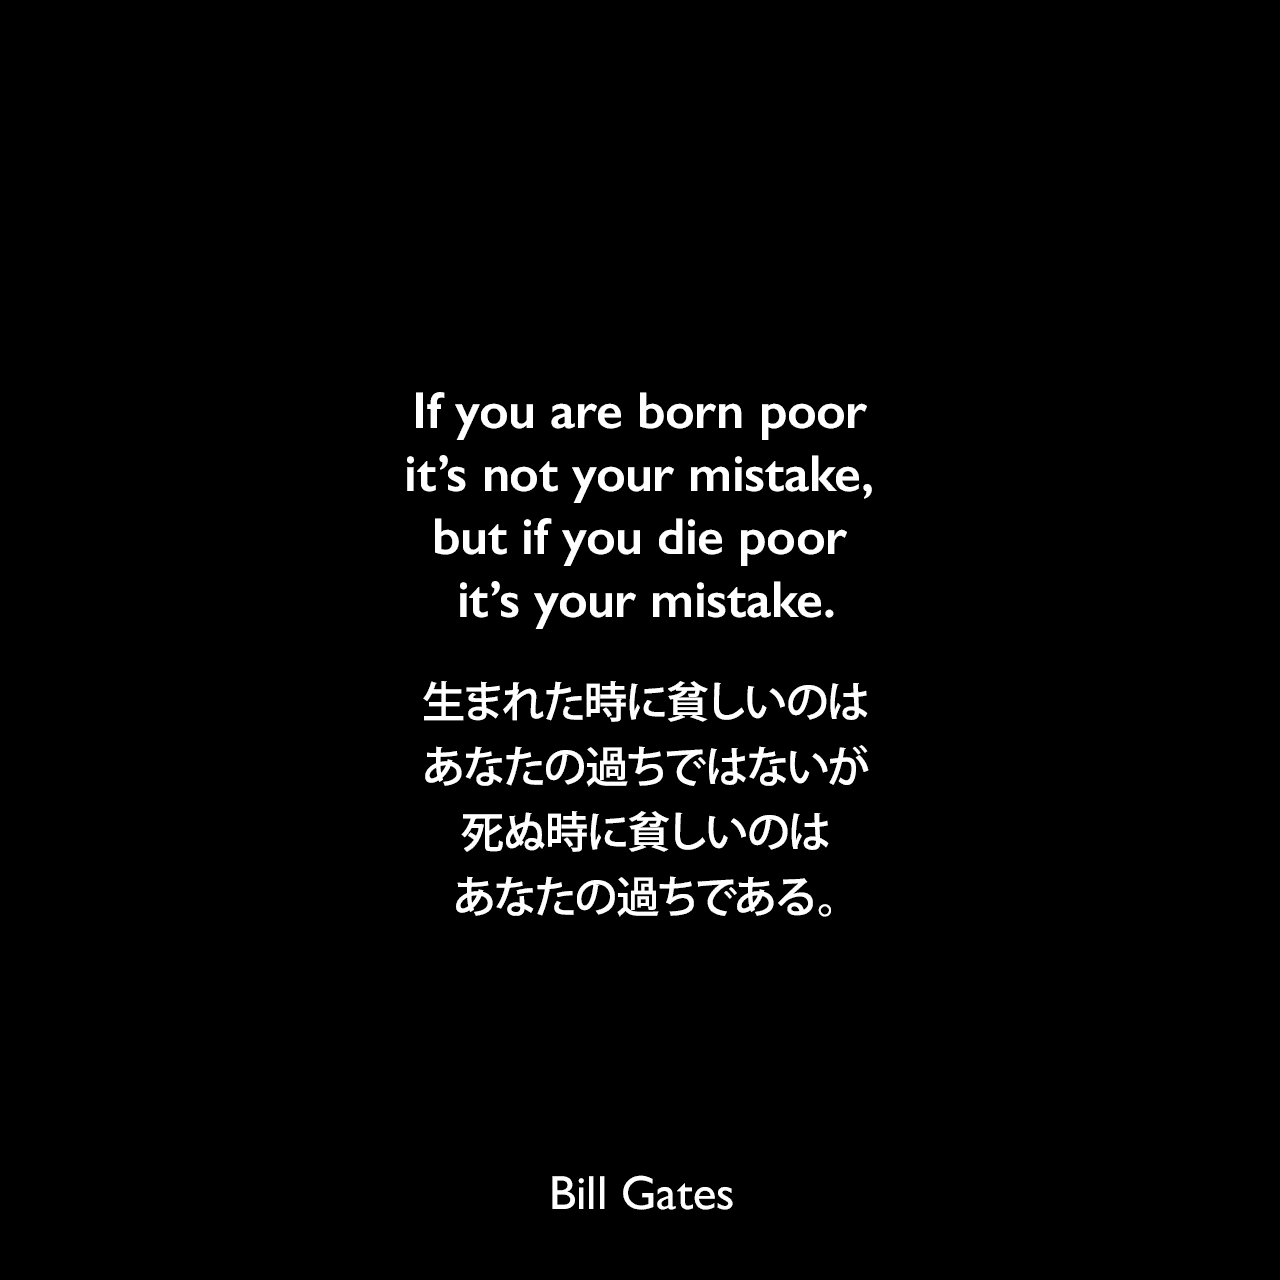 If you are born poor it’s not your mistake, but if you die poor it’s your mistake.生まれた時に貧しいのはあなたの過ちではないが、死ぬ時に貧しいのはあなたの過ちである。